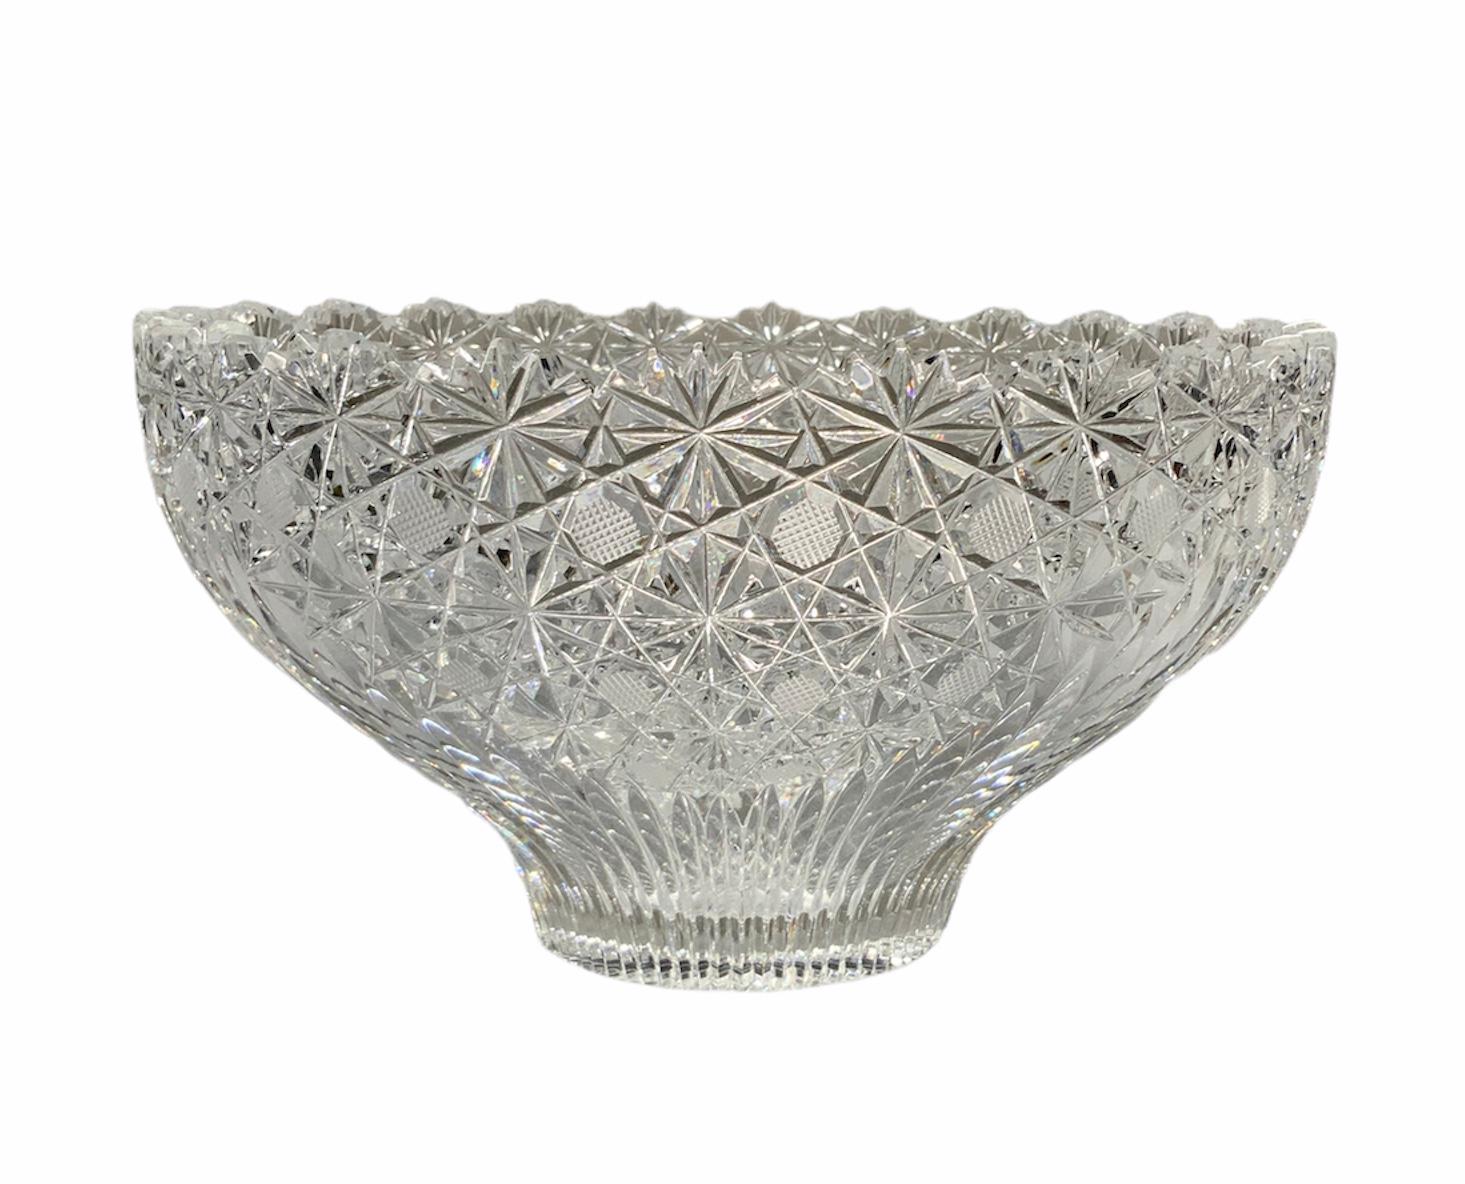 Hand-Crafted American Brilliant Cut Glass Crystal Bowl